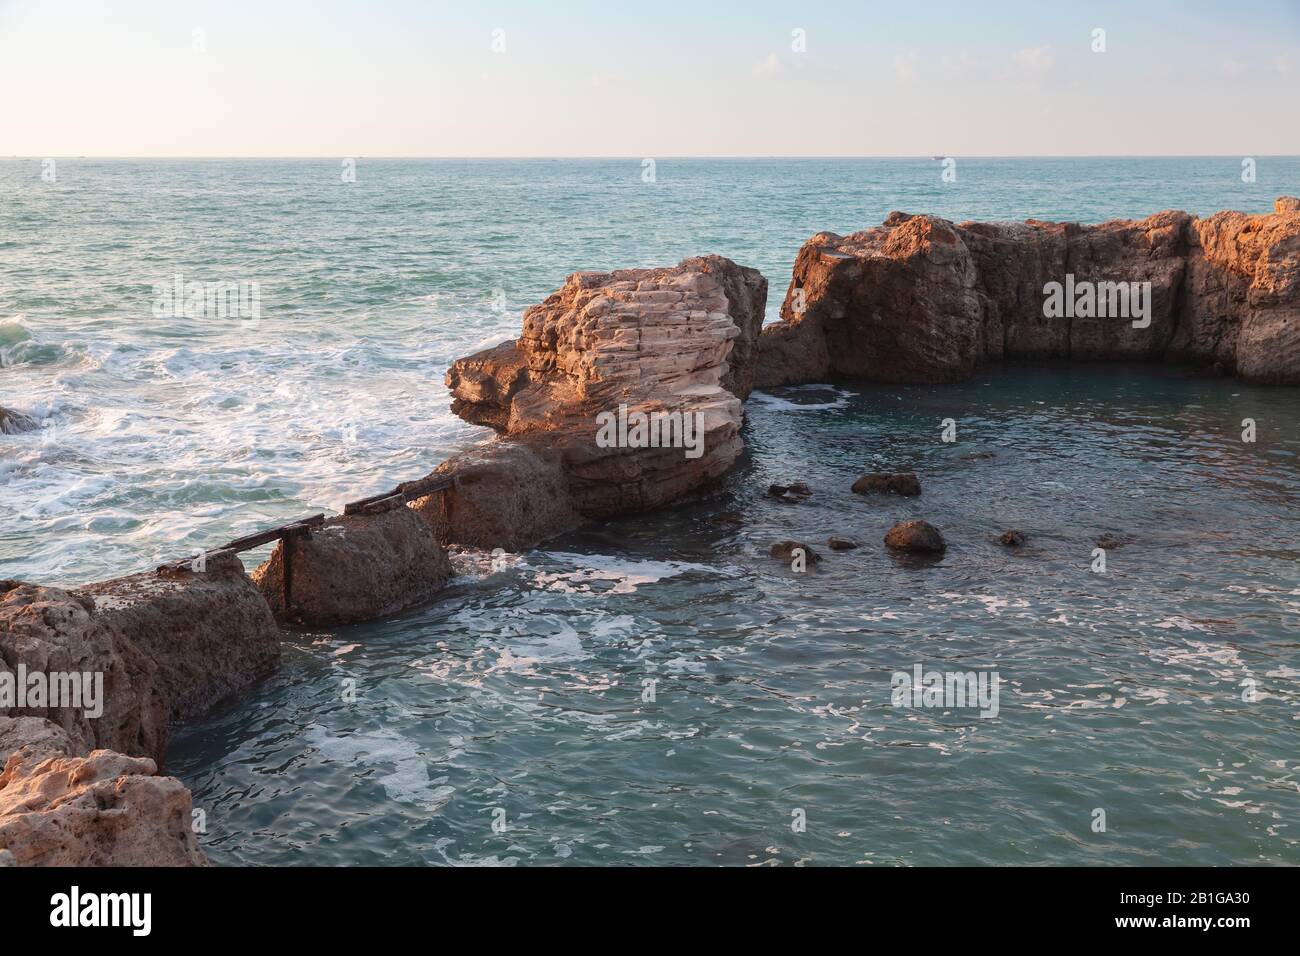 Coastal landscape with old fortifications and stormy Mediterranean Sea. Montazah beach, Alexandria, Egypt Stock Photo